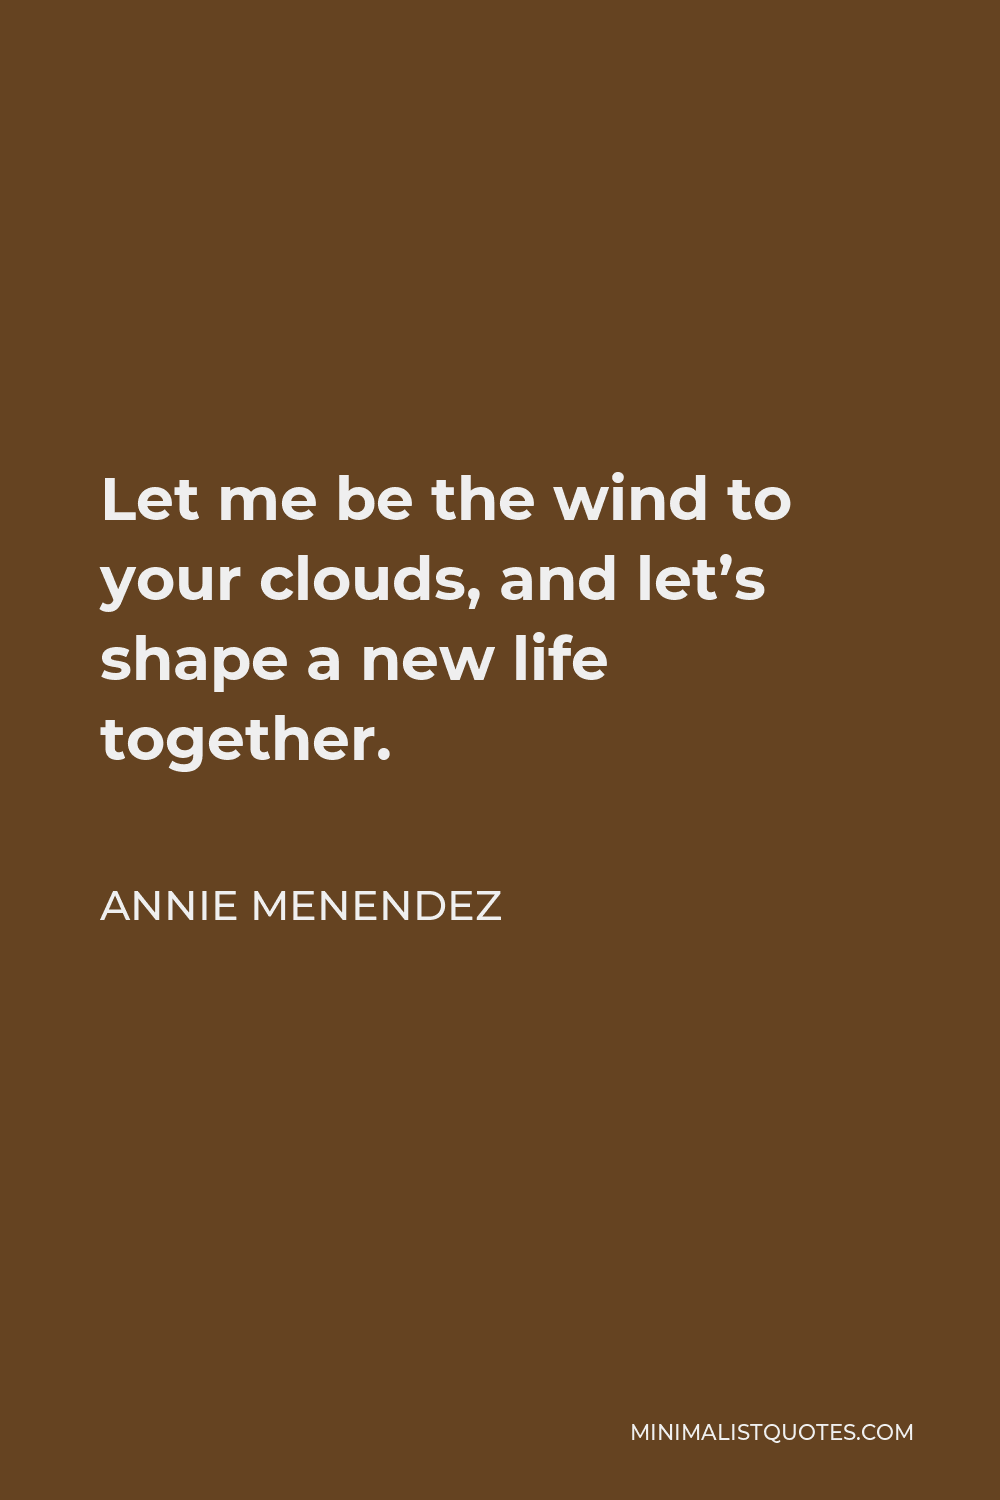 Annie Menendez Quote - Let me be the wind to your clouds, and let’s shape a new life together.